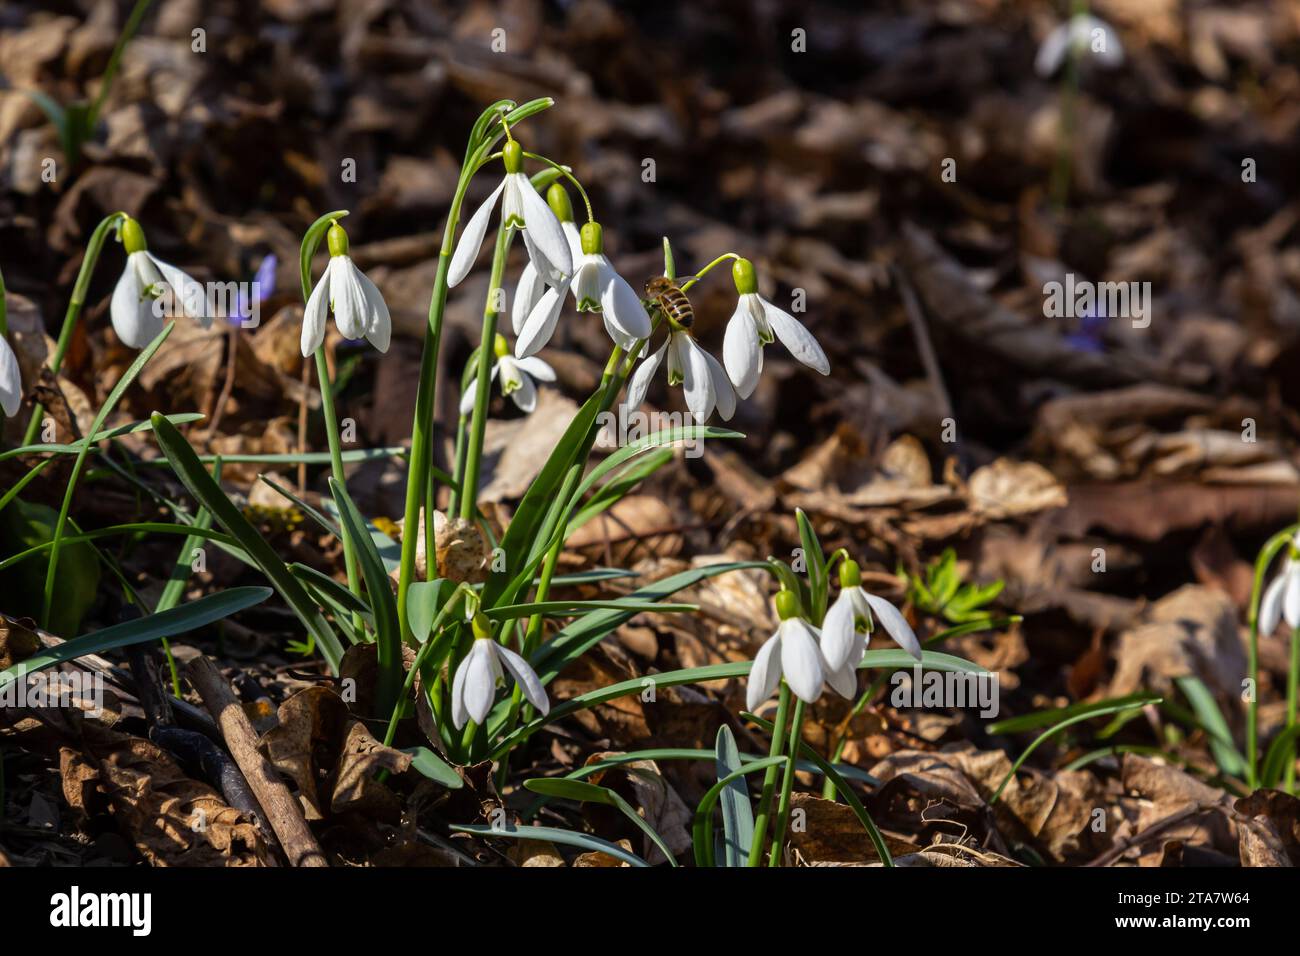 White snowdrop flower, close up. Galanthus blossoms illuminated by the sun in the green blurred background, early spring. Galanthus nivalis bulbous, p Stock Photo